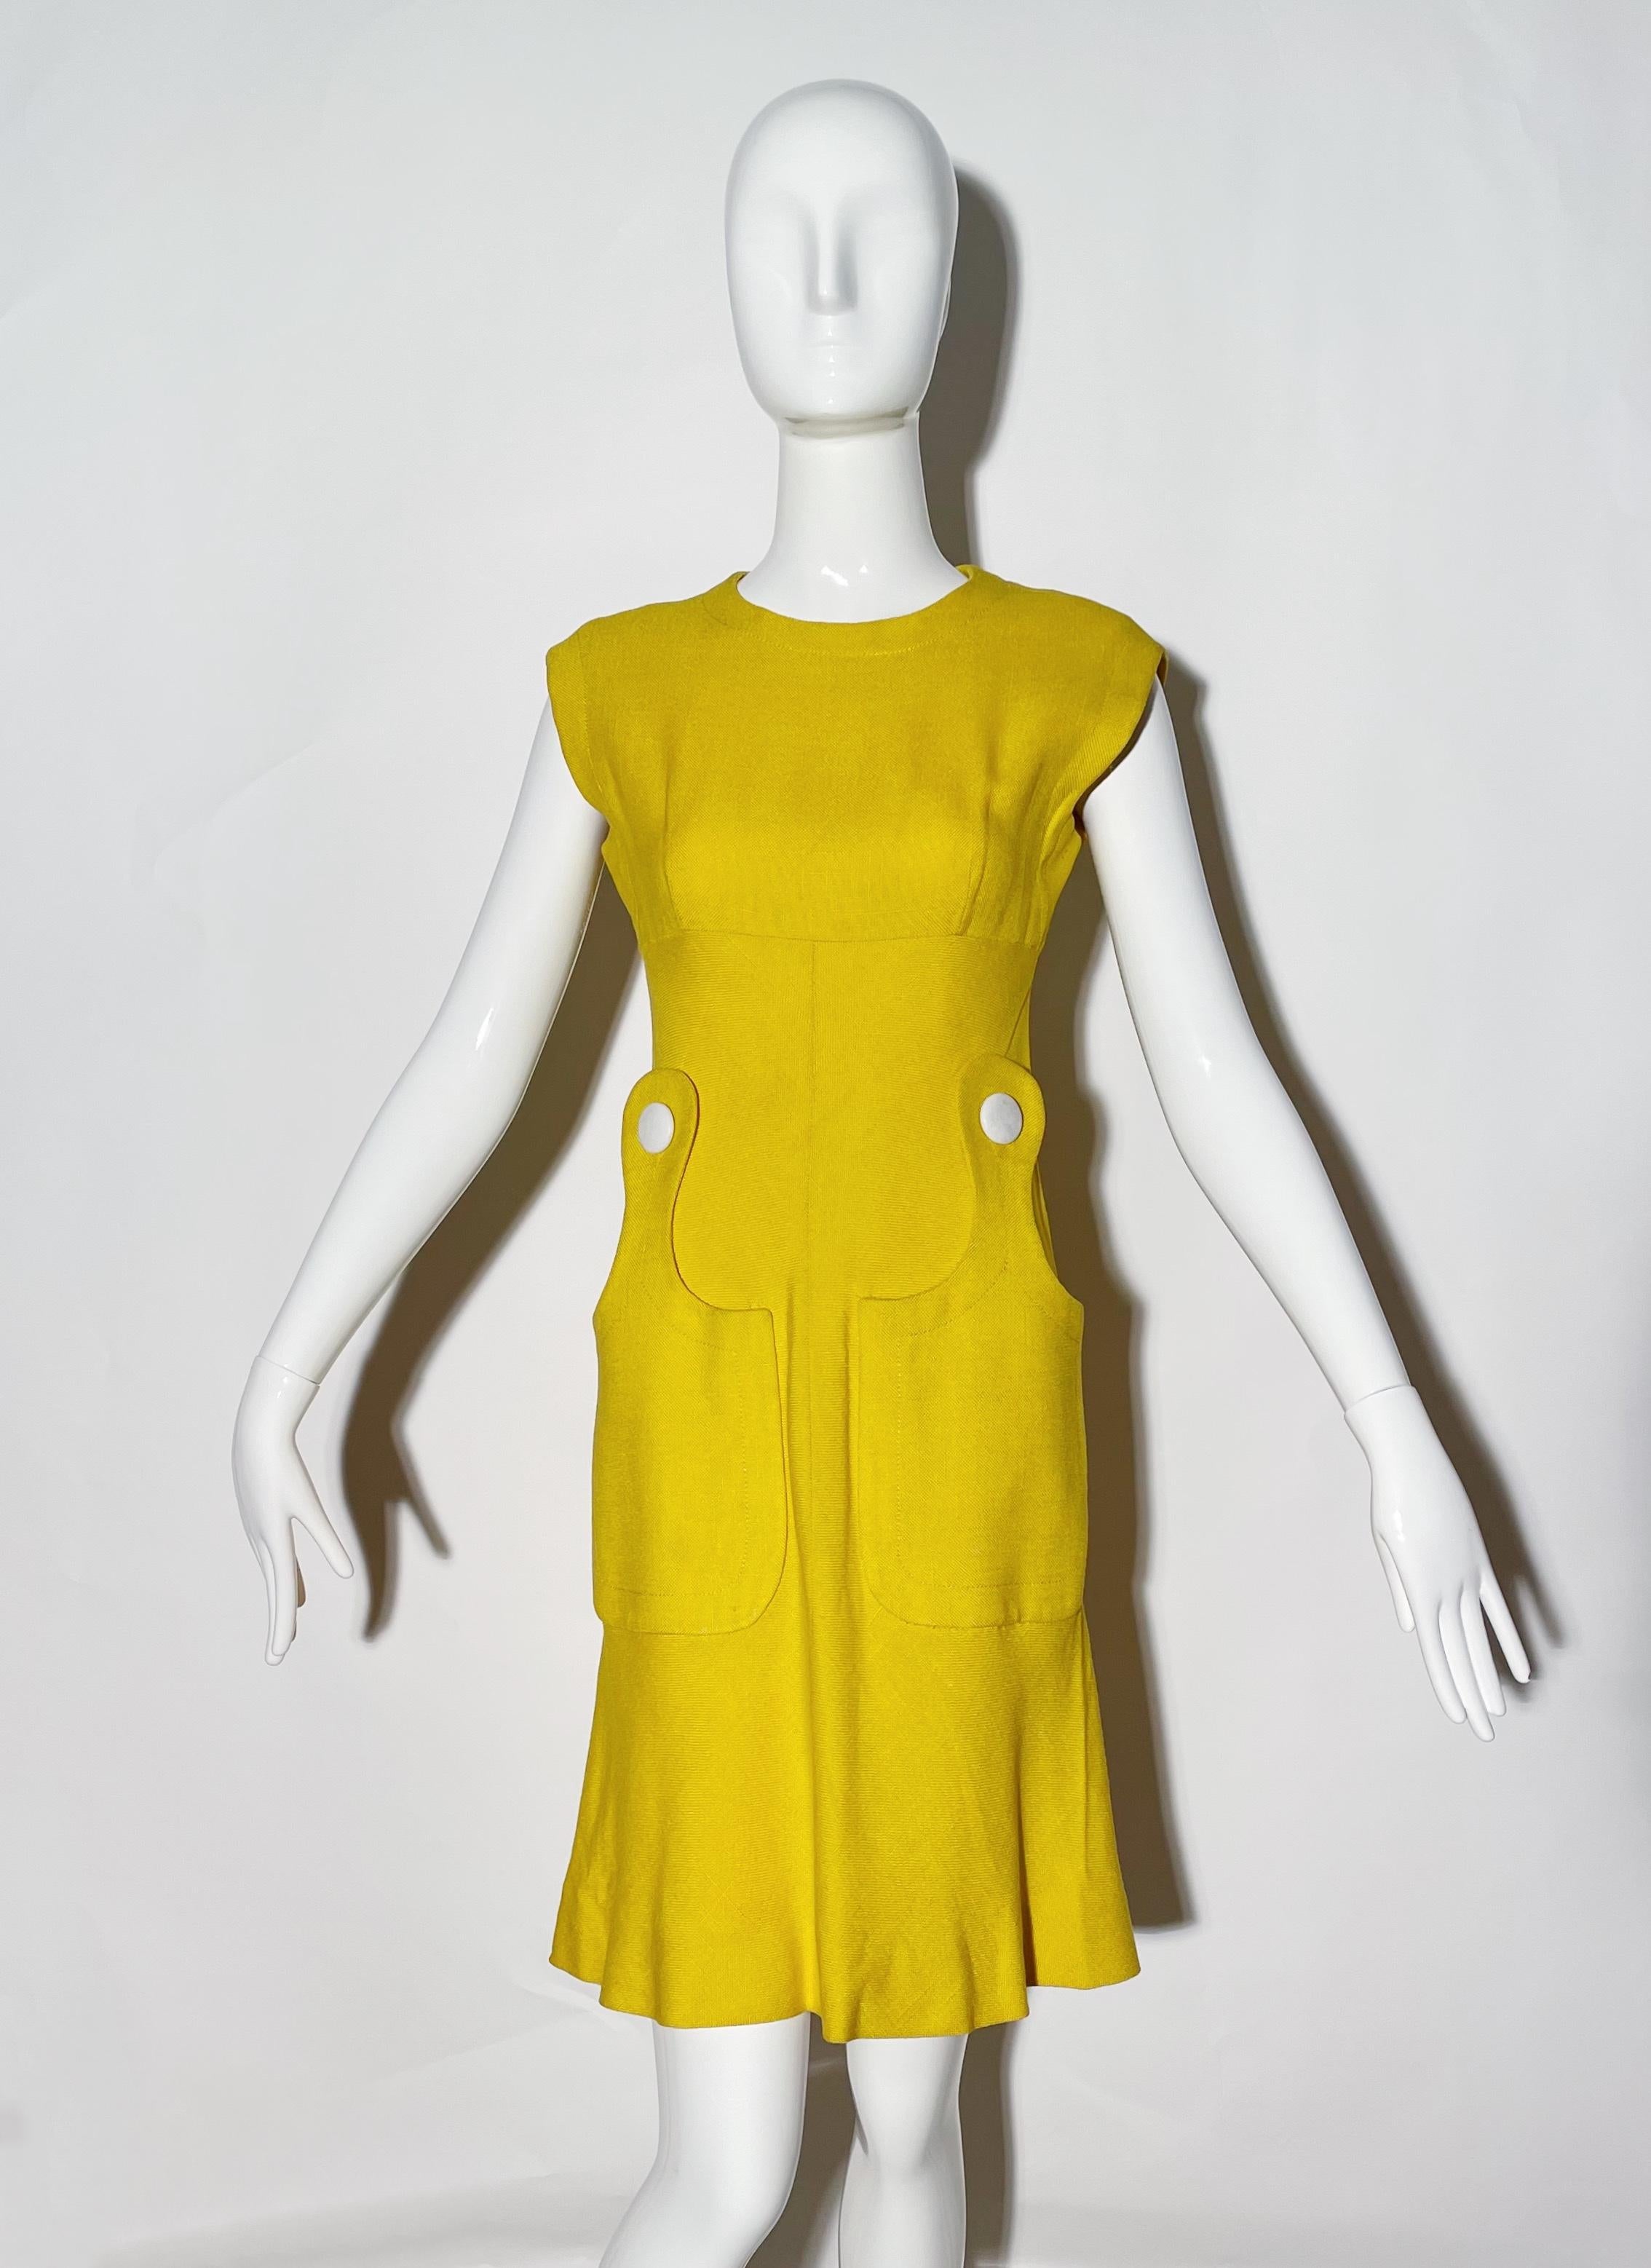 Yellow linen mod dress. Front pockets. Large white button details. Rear zipper closure. Lined. Made in France. 
*Condition: excellent vintage condition. No visible flaws.

Measurements Taken Laying Flat (inches)—
Shoulder to Shoulder: 17 in.
Bust: